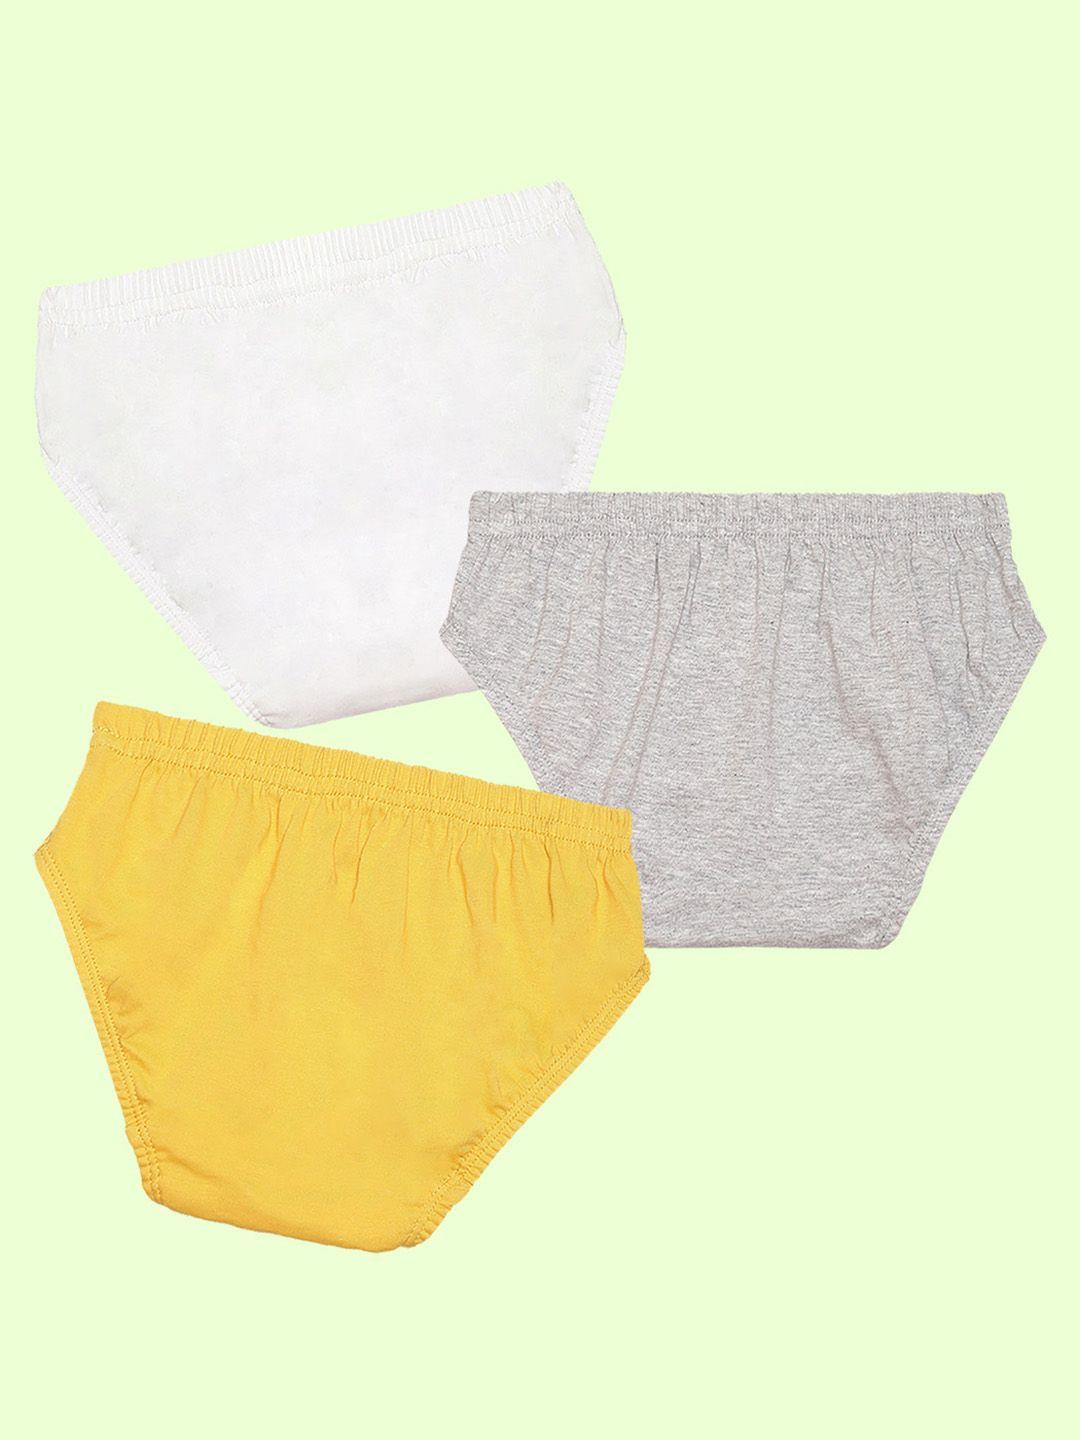 nusyl boys pack of 3 pure cotton basic briefs